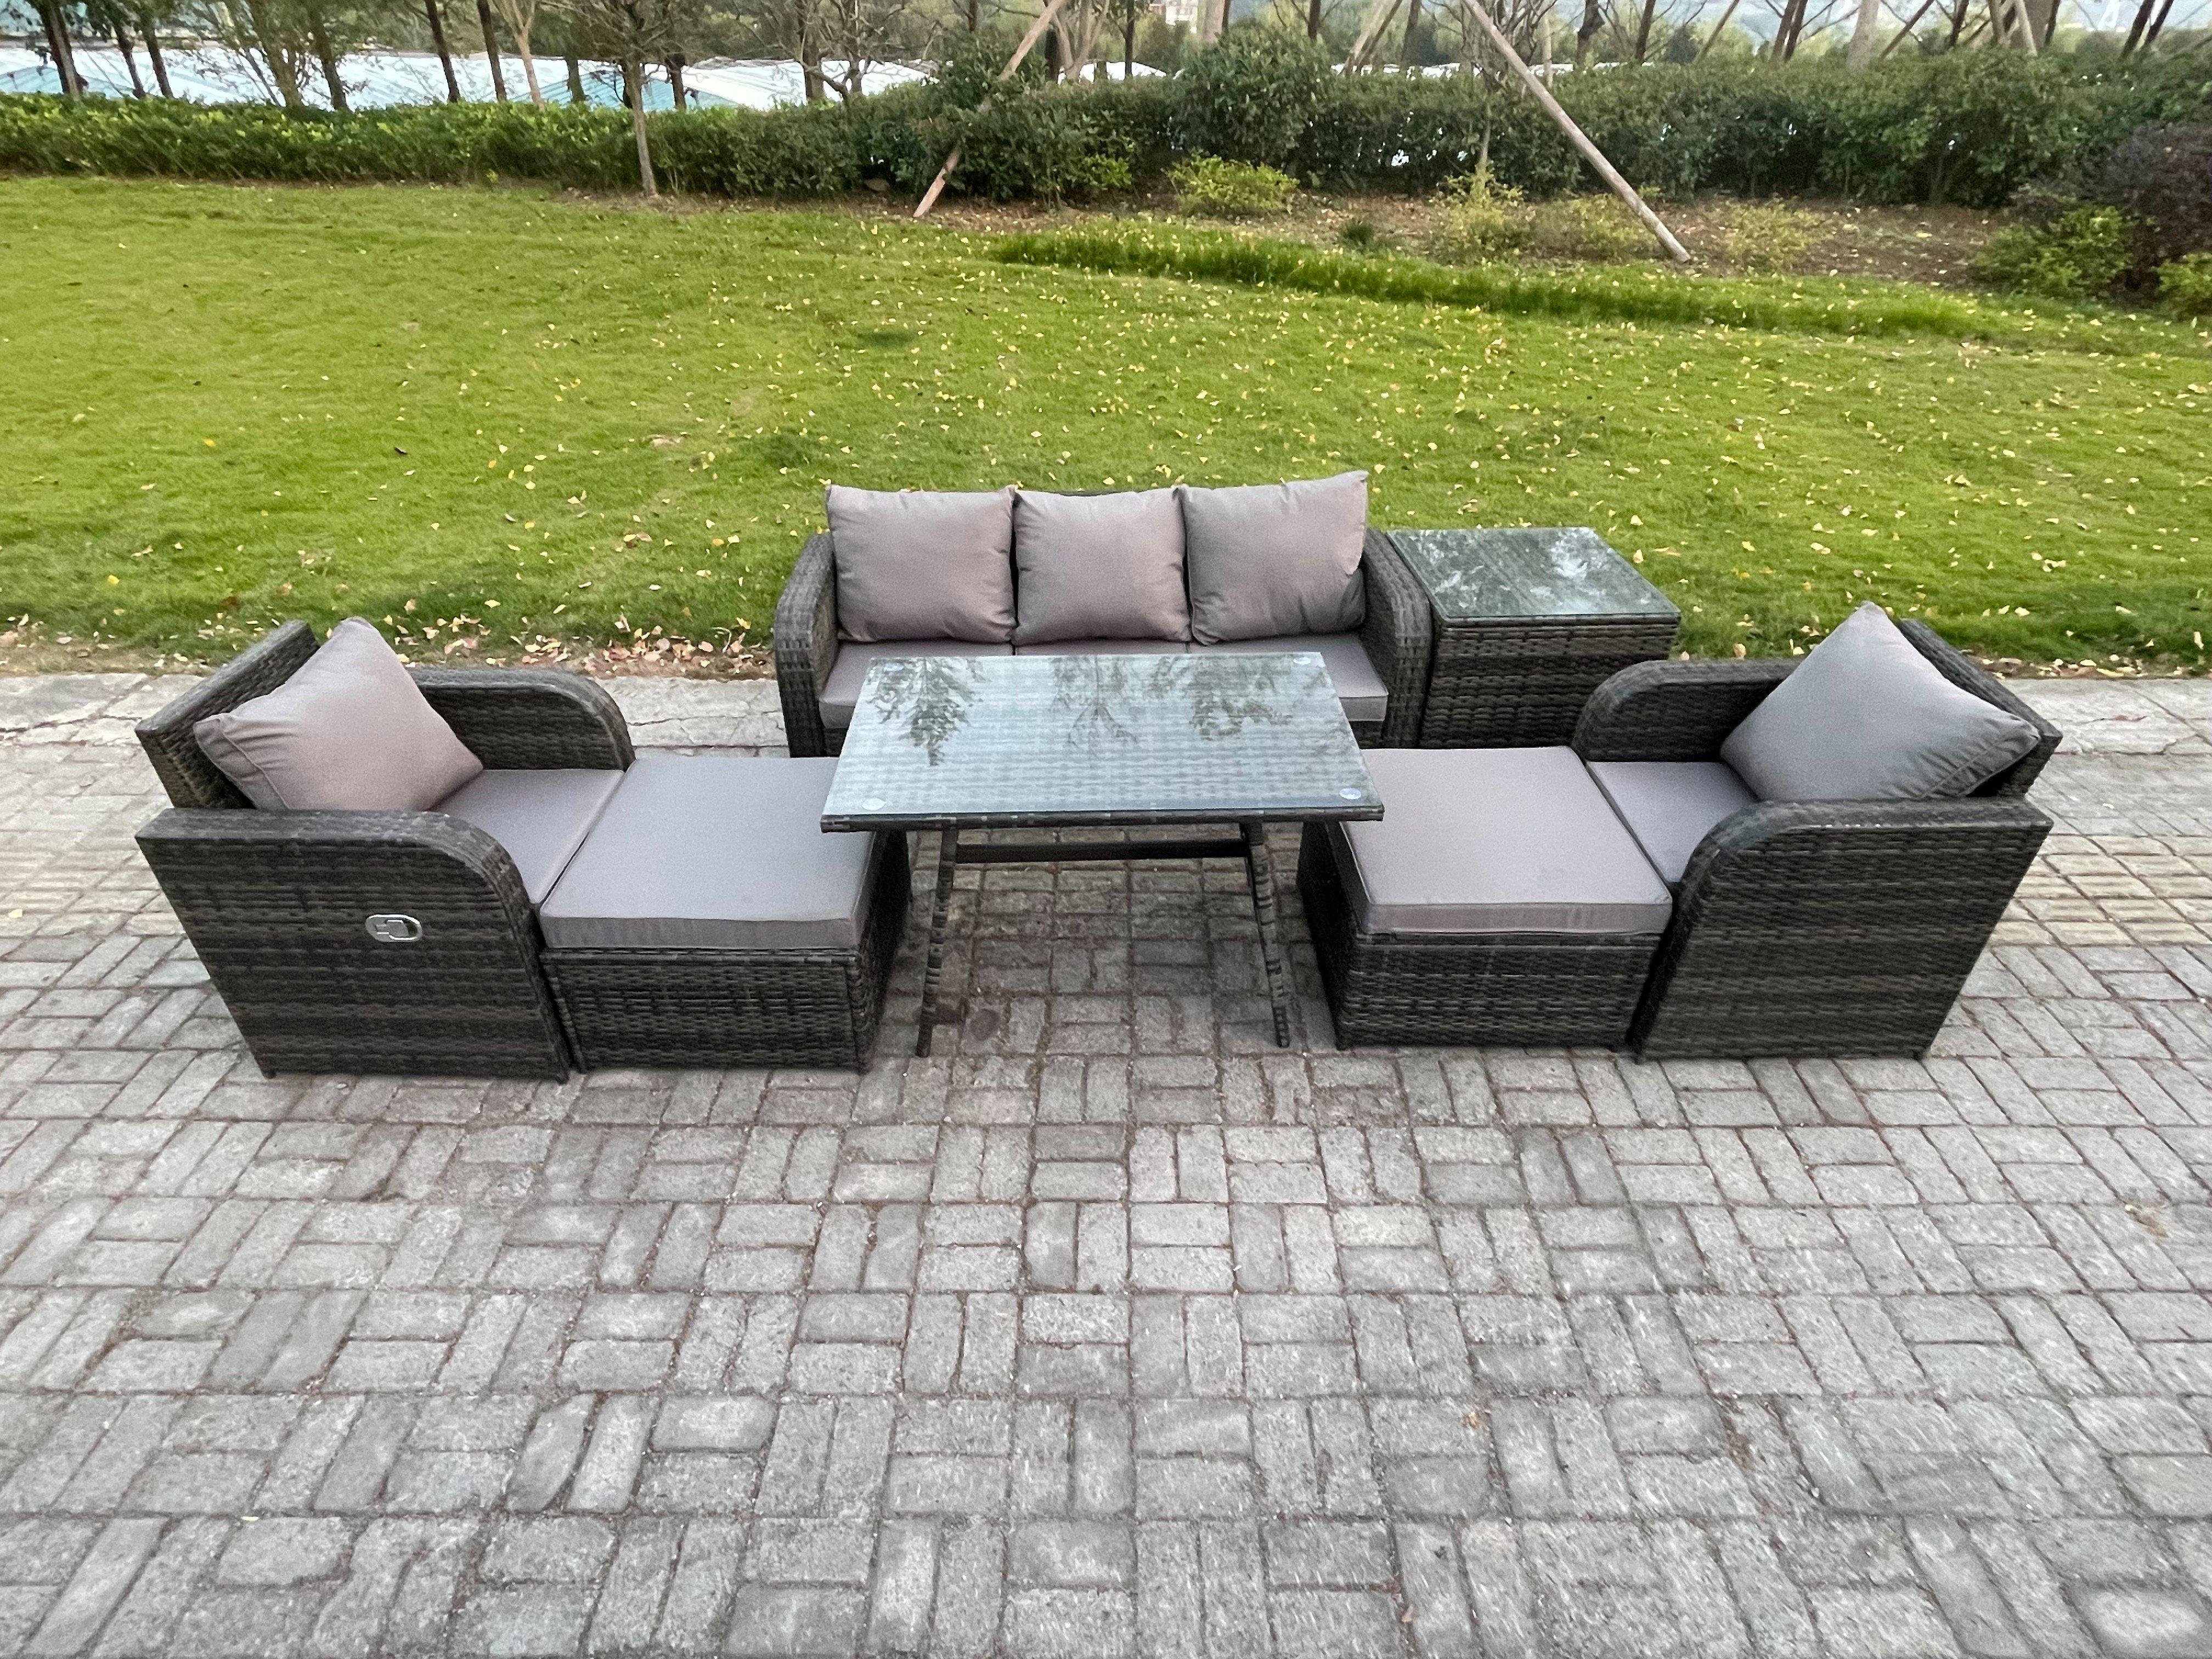 Outdoor Garden Furniture Sets 7 Pieces Wicker Rattan Furniture Sofa Sets With Rectangular Dining Table 2 Big Footstool